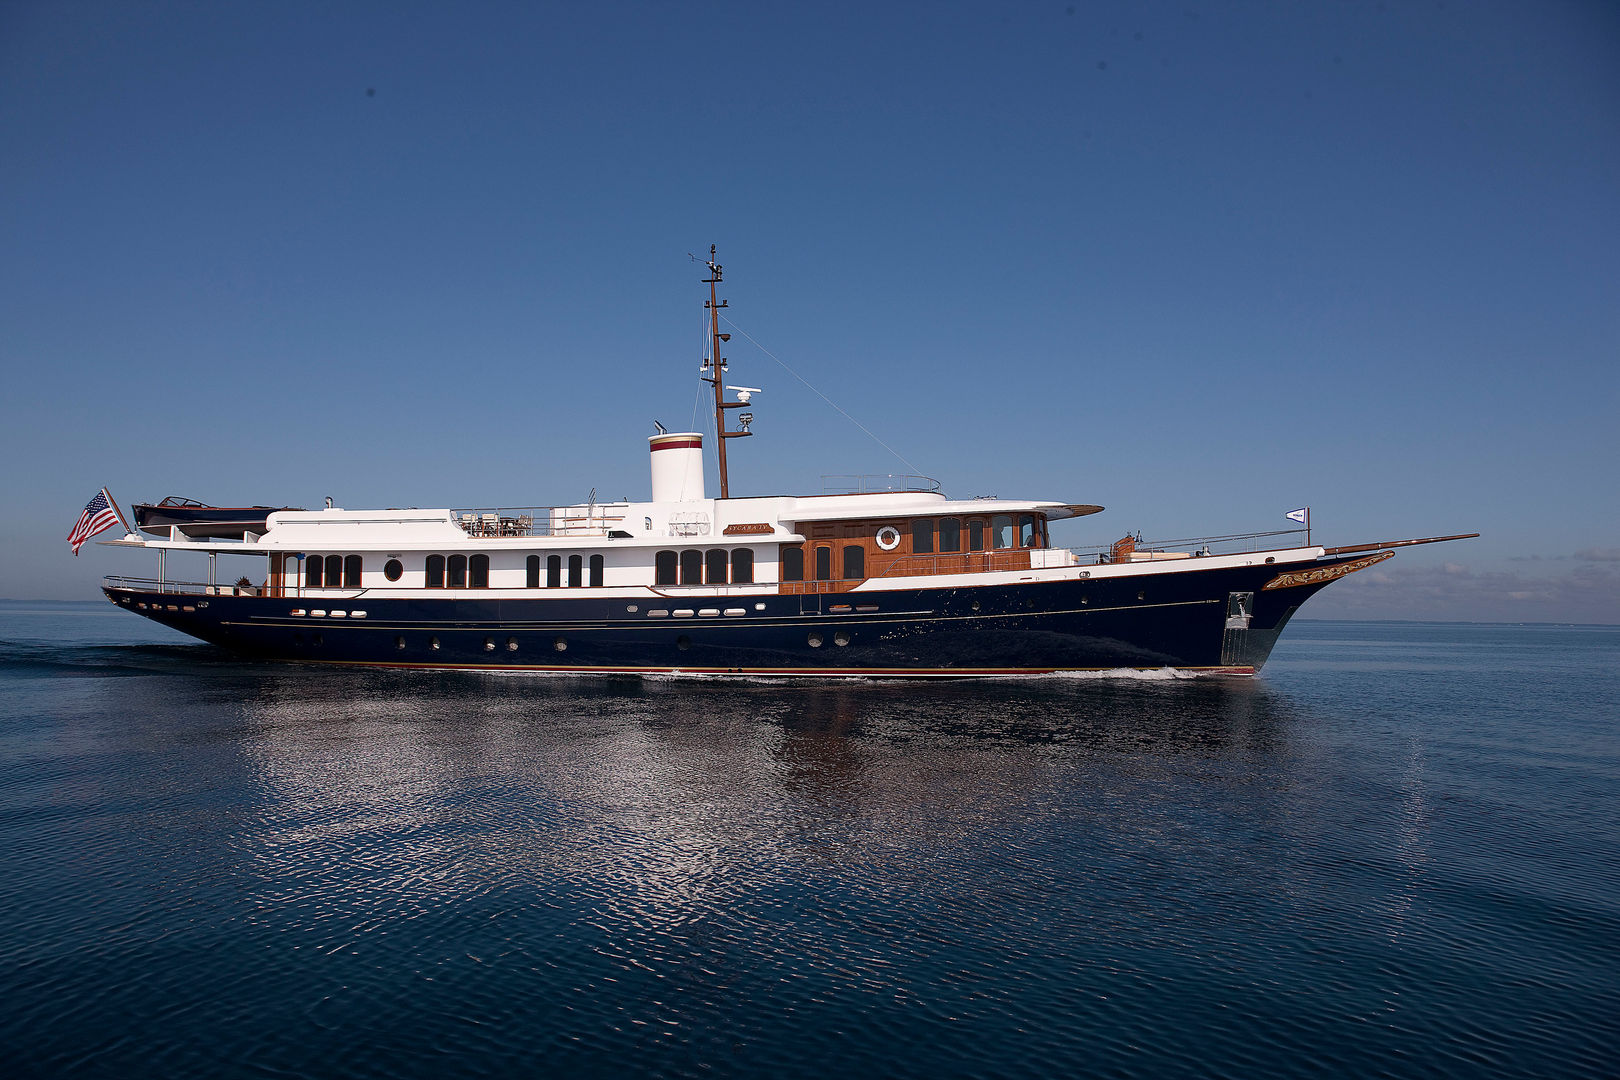 Sycara IV profile all Classic style yachts & jets